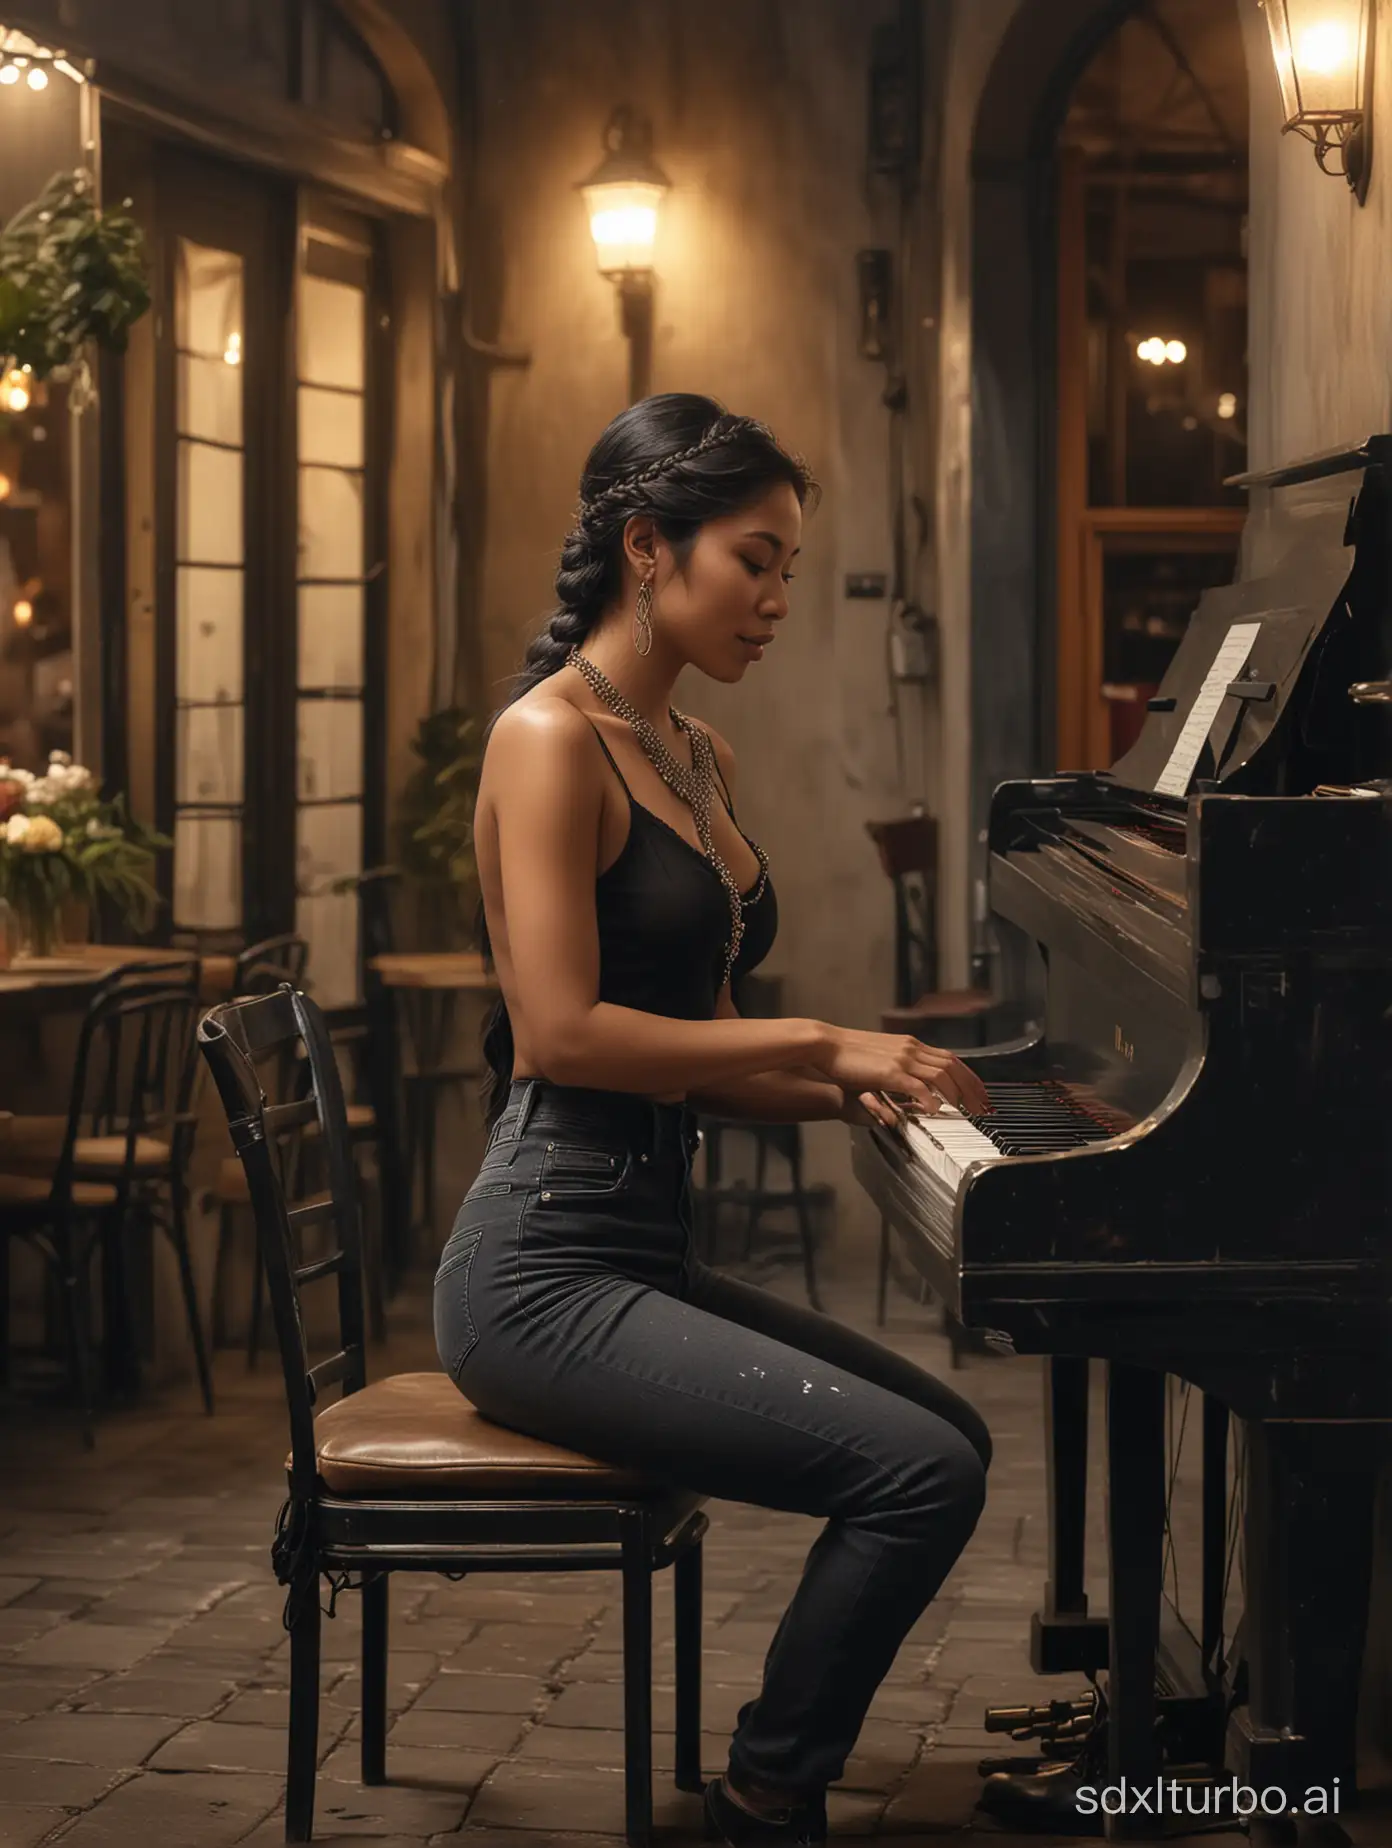 Indonesian-Woman-Playing-Jazz-Piano-in-Dimly-Lit-Luxury-Outdoor-Caf